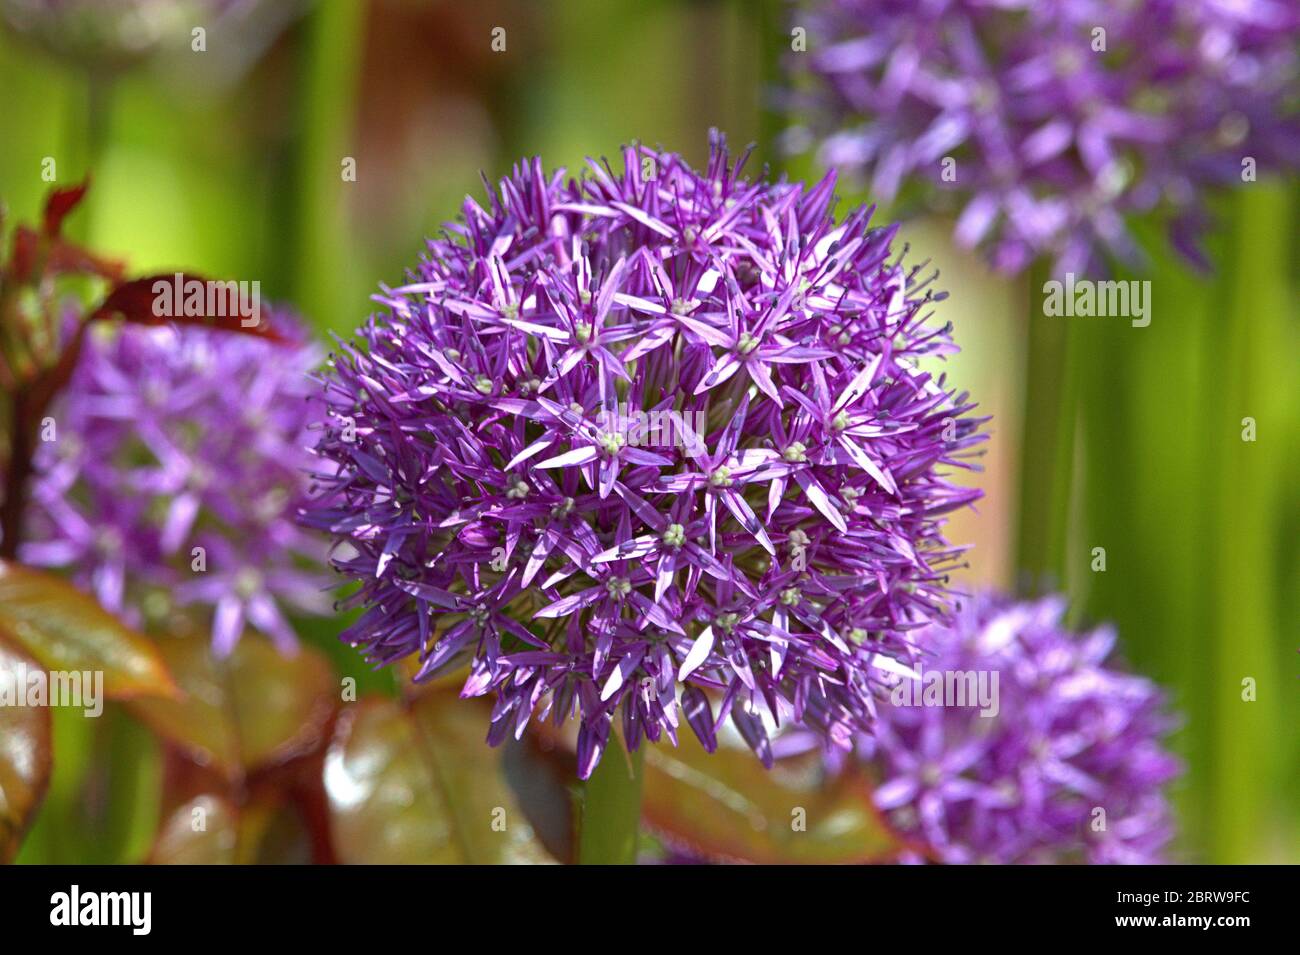 Schleswig, Deutschland. 21st May, 2020. 06/02/2019, close-up of the blood ball of an ornamental leek, giant leek Allium globemaster in a urban bed in Schleswig. Order: Asparagus-like (Asparagales), Family: Amarylliswax (Amaryllidaceae), Subfamily: Leekwax (Allioideae), Tribus: Allieae, Genus: Leek (Allium), Species: Giant leek | usage worldwide Credit: dpa/Alamy Live News Stock Photo